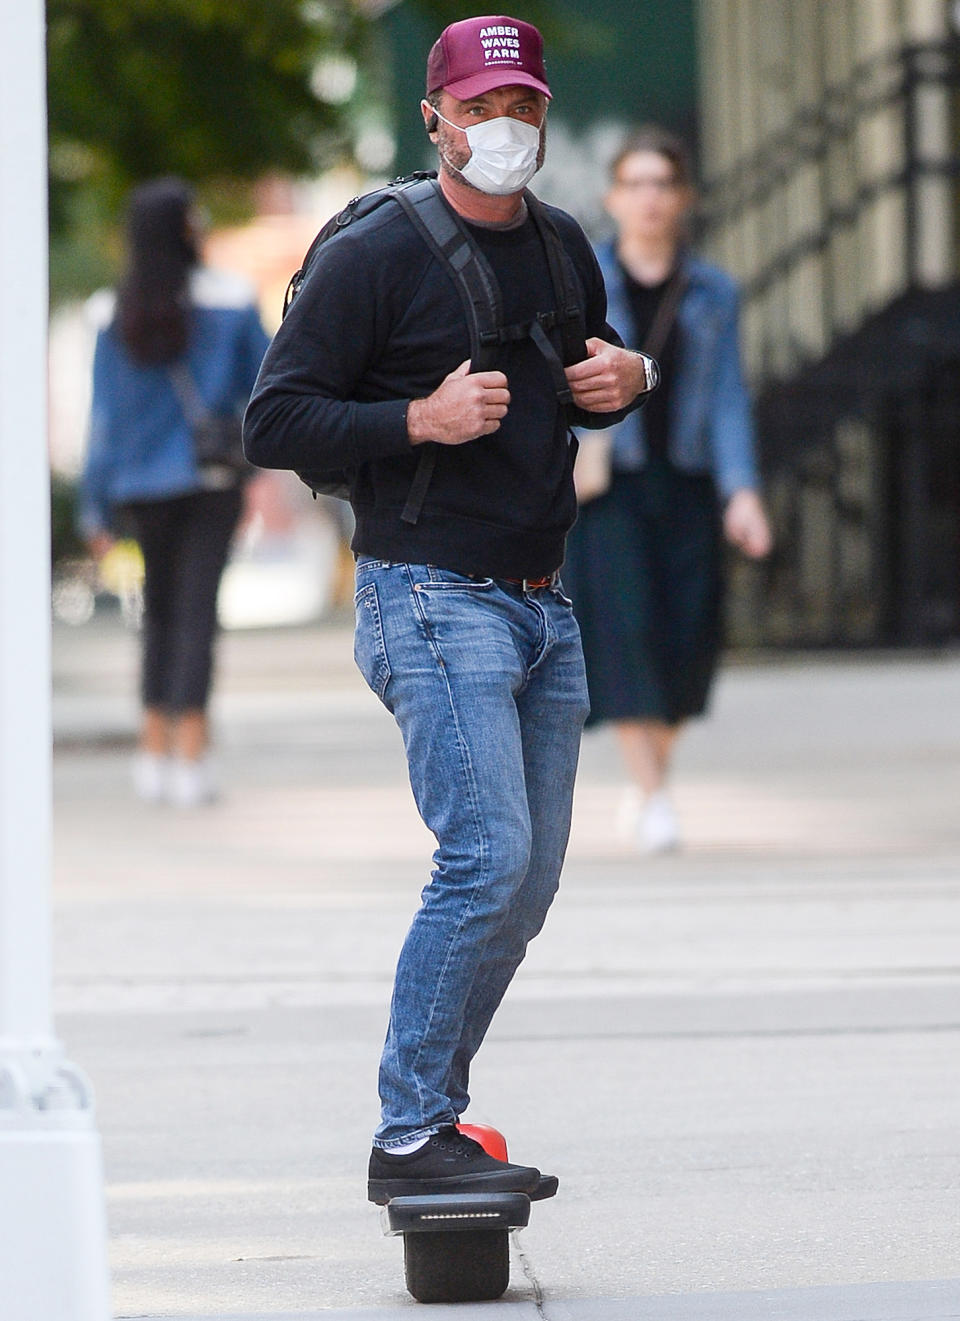 <p>Liev Schreiber takes a ride on his motorized skateboard on Tuesday in downtown N.Y.C.</p>